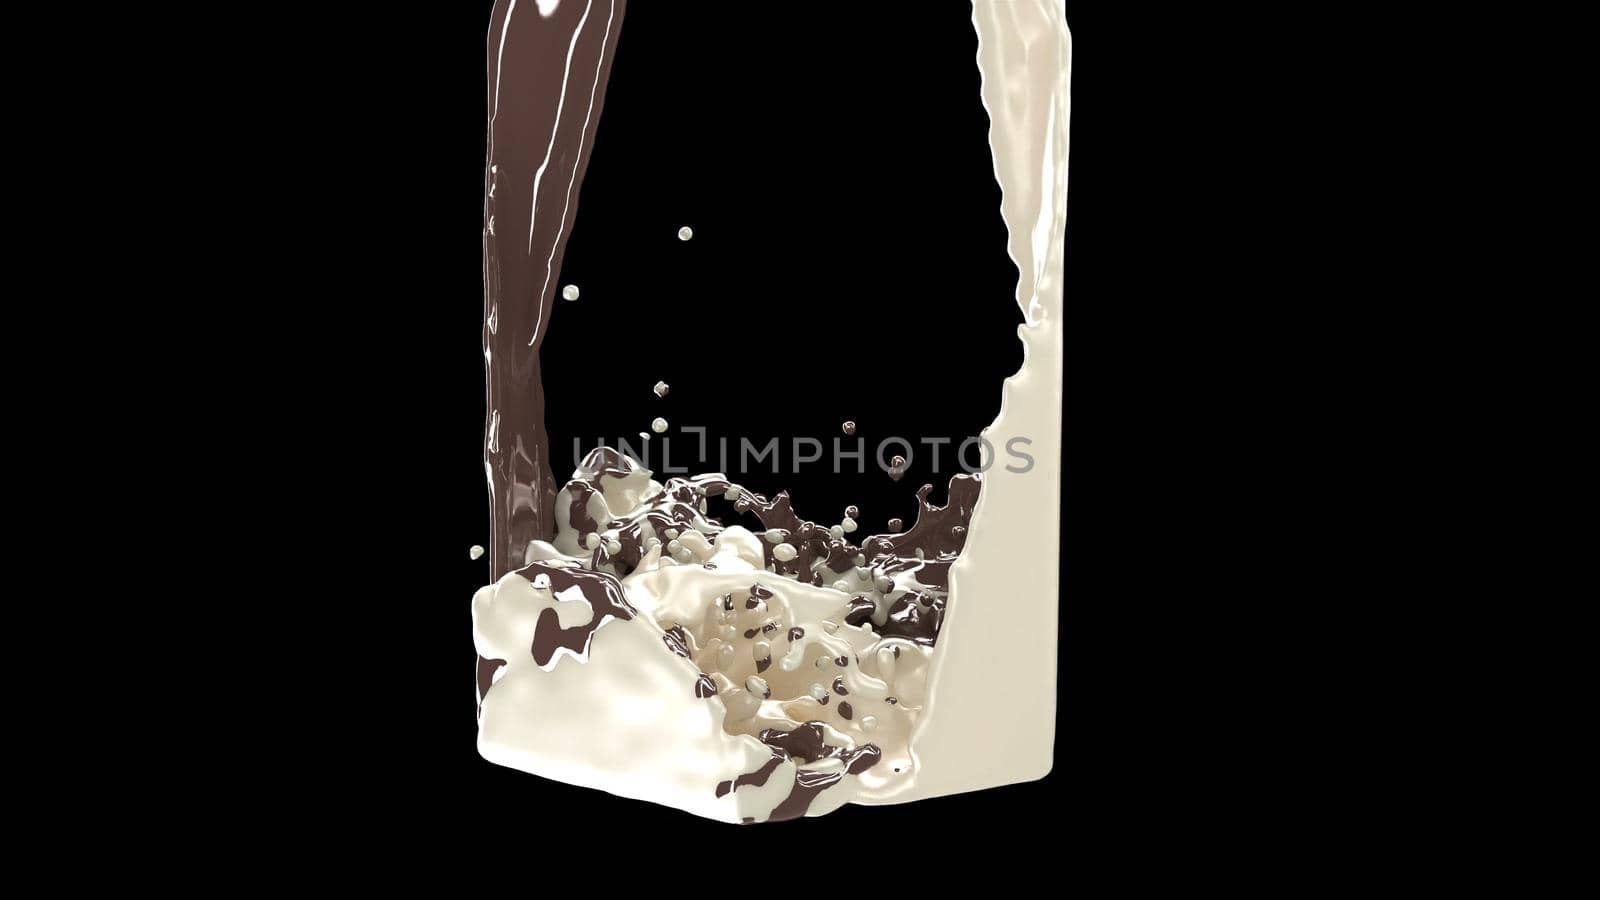 Dark chocolate white milk poured and mixed Sweet food 3d render